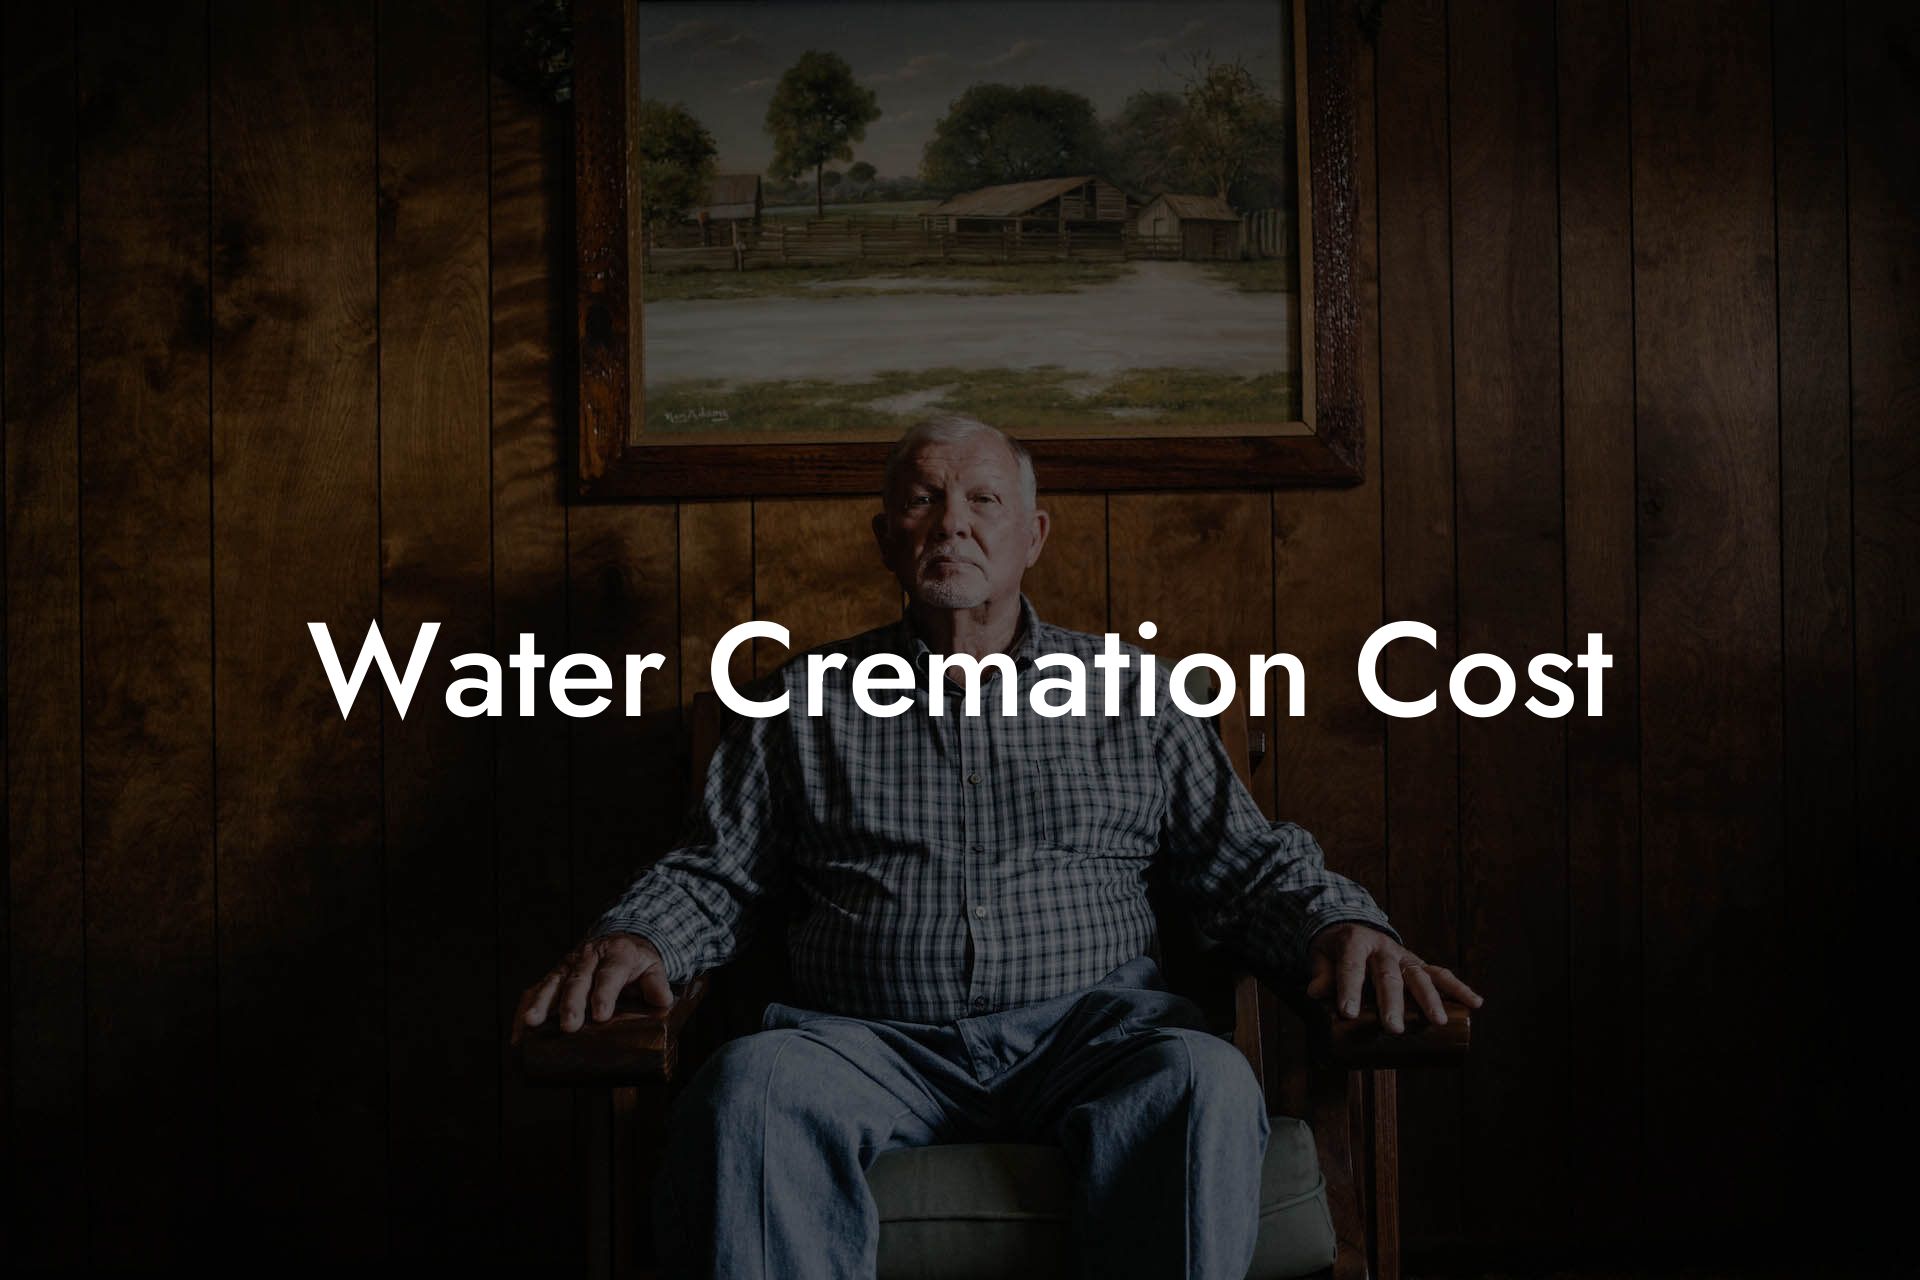 Water Cremation Cost